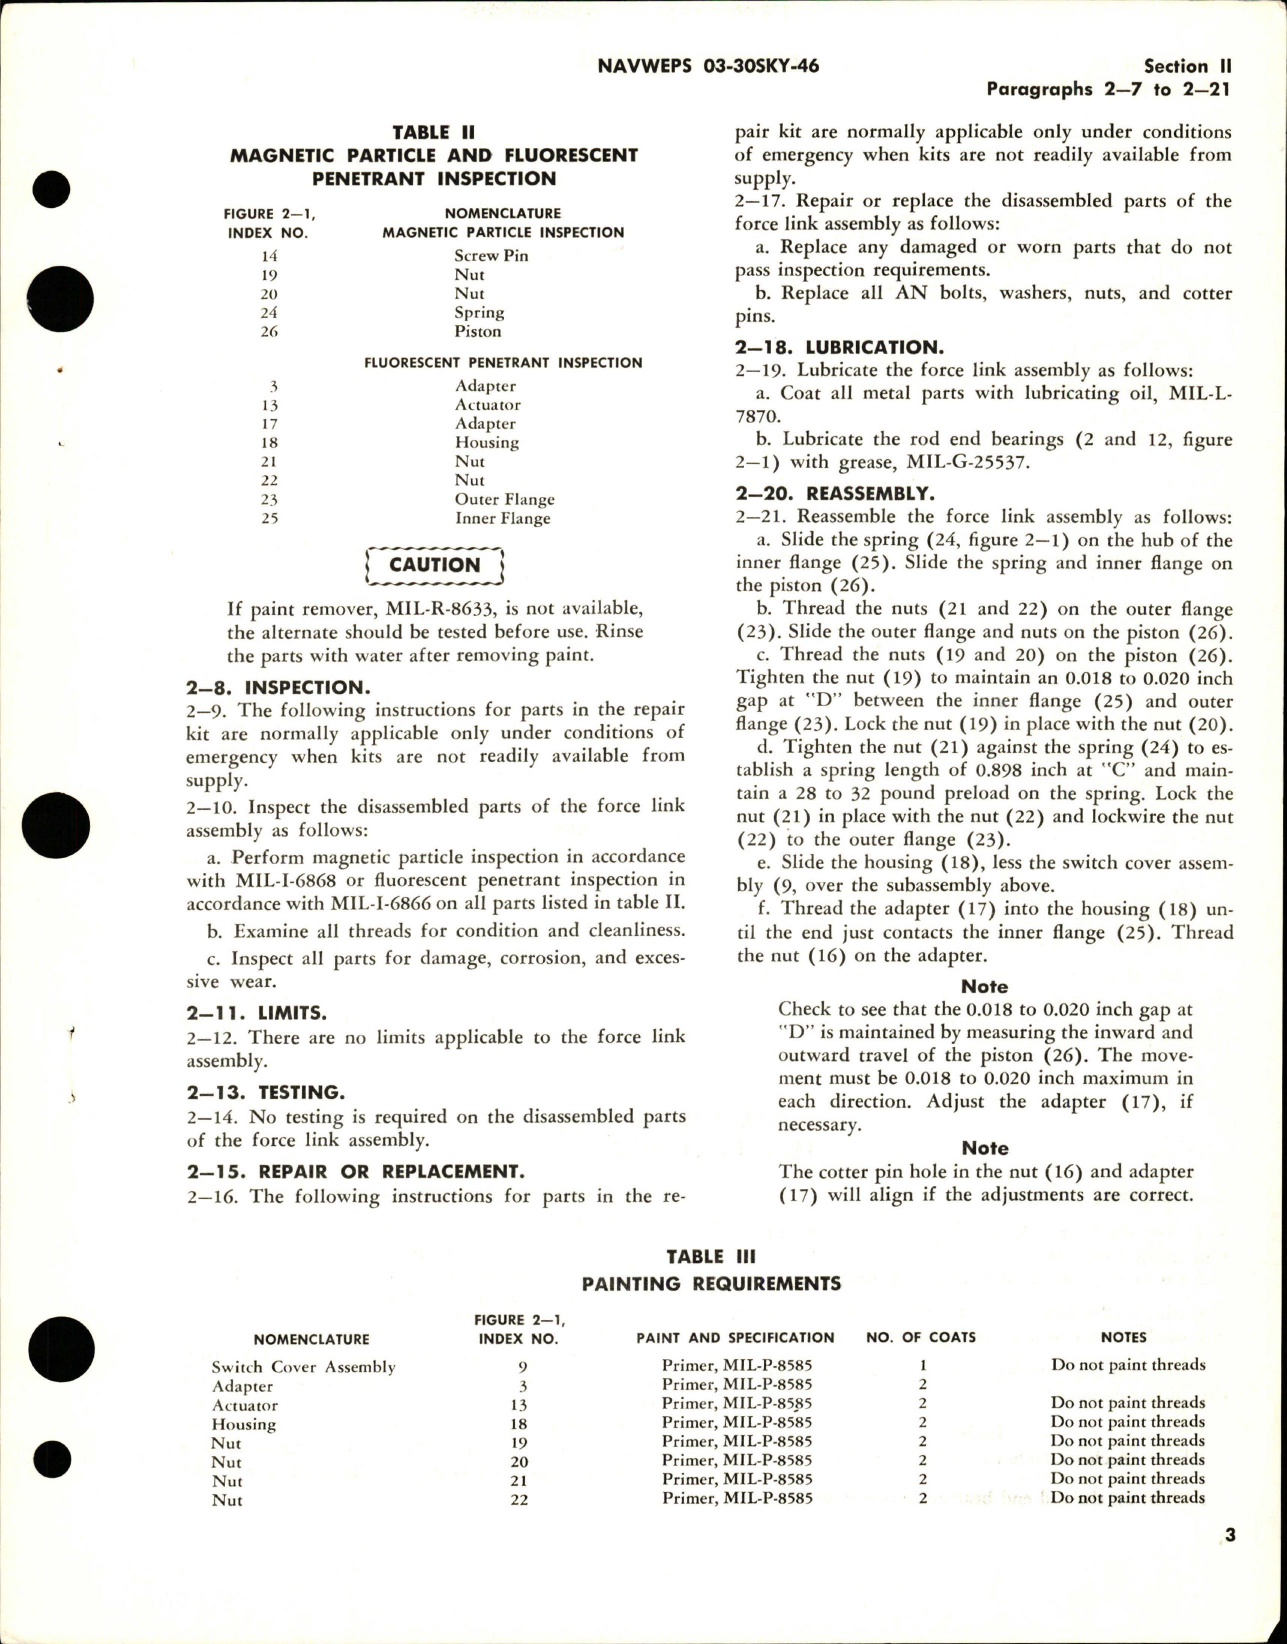 Sample page 5 from AirCorps Library document: Overhaul Instructions for Force Link Assembly - Part S6140-61638-1